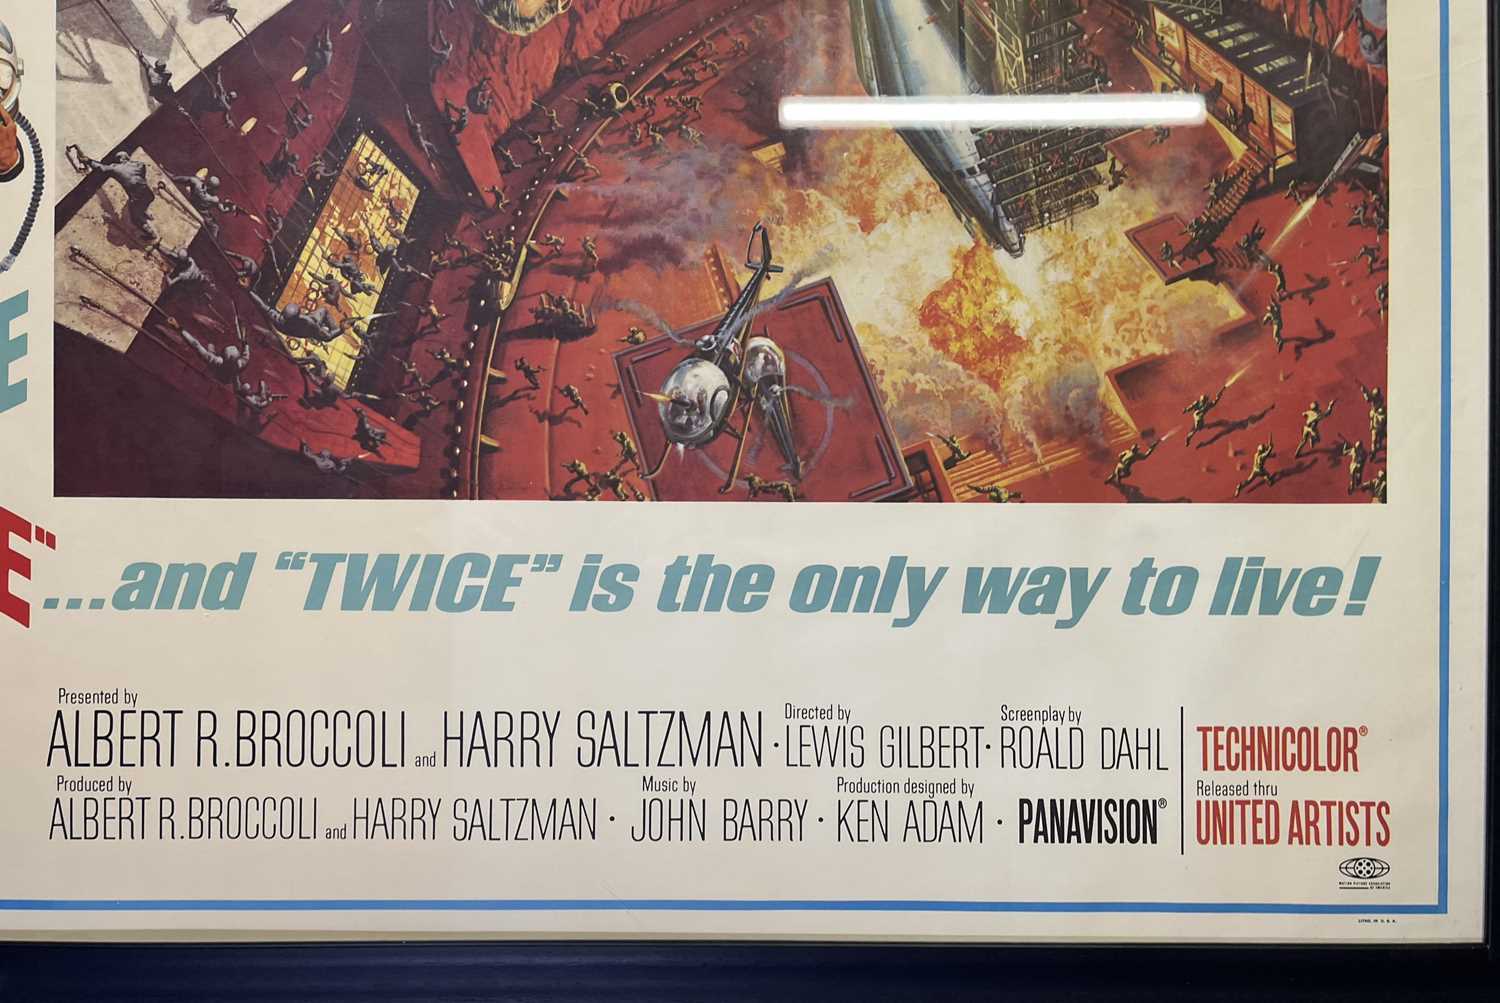 JAMES BOND - YOU ONLY LIVE TWICE (1967) - US DRIVE-IN POSTER. - Image 5 of 6